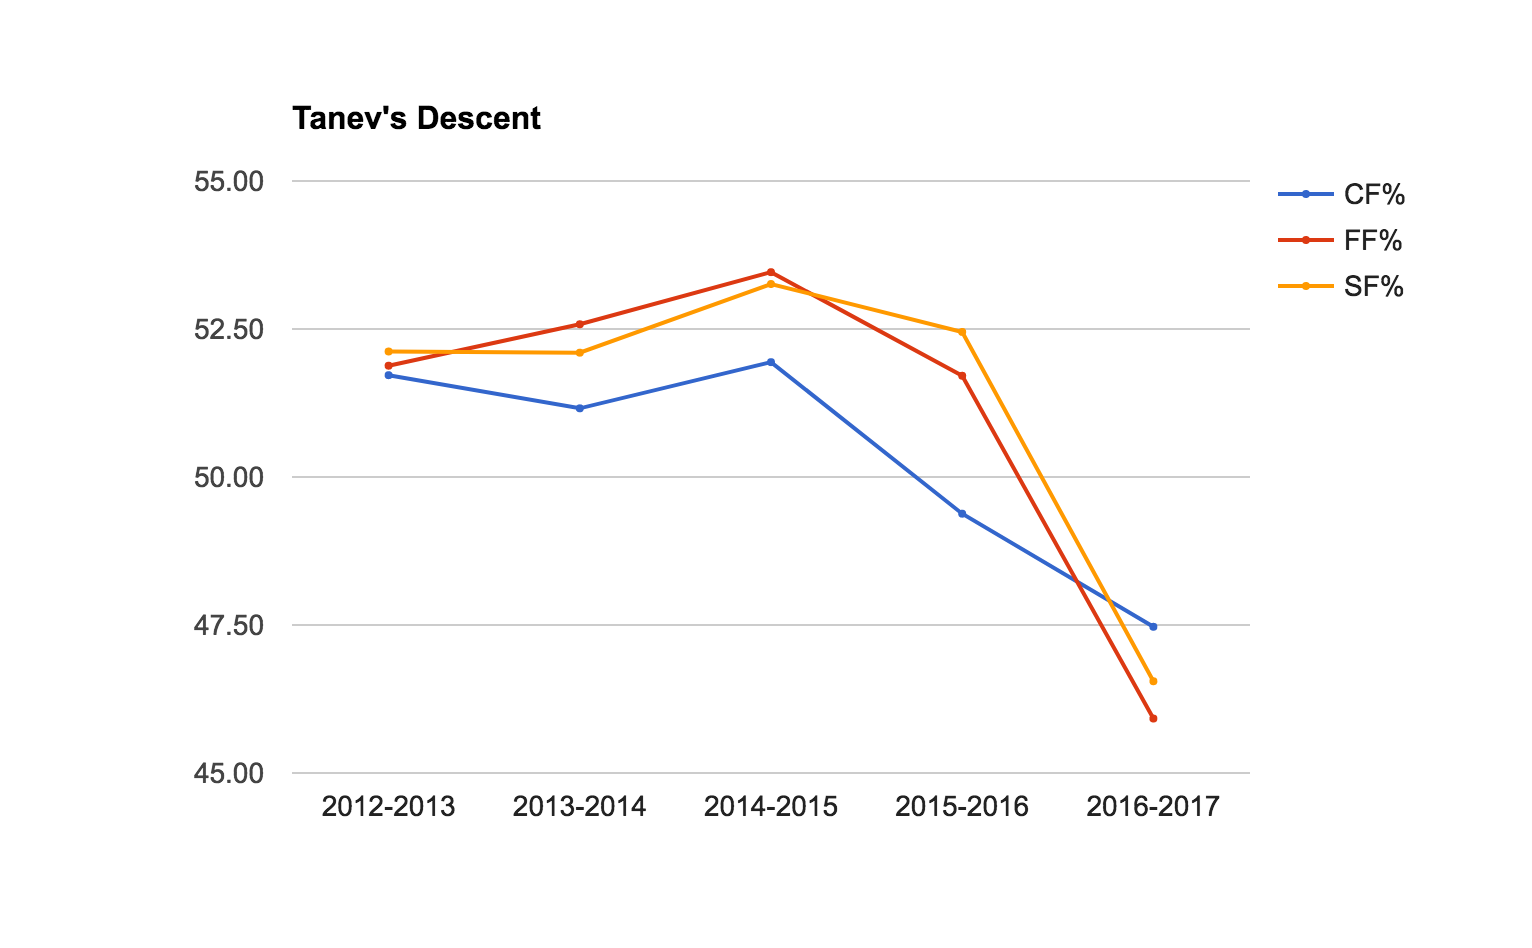 Tanev's Descent